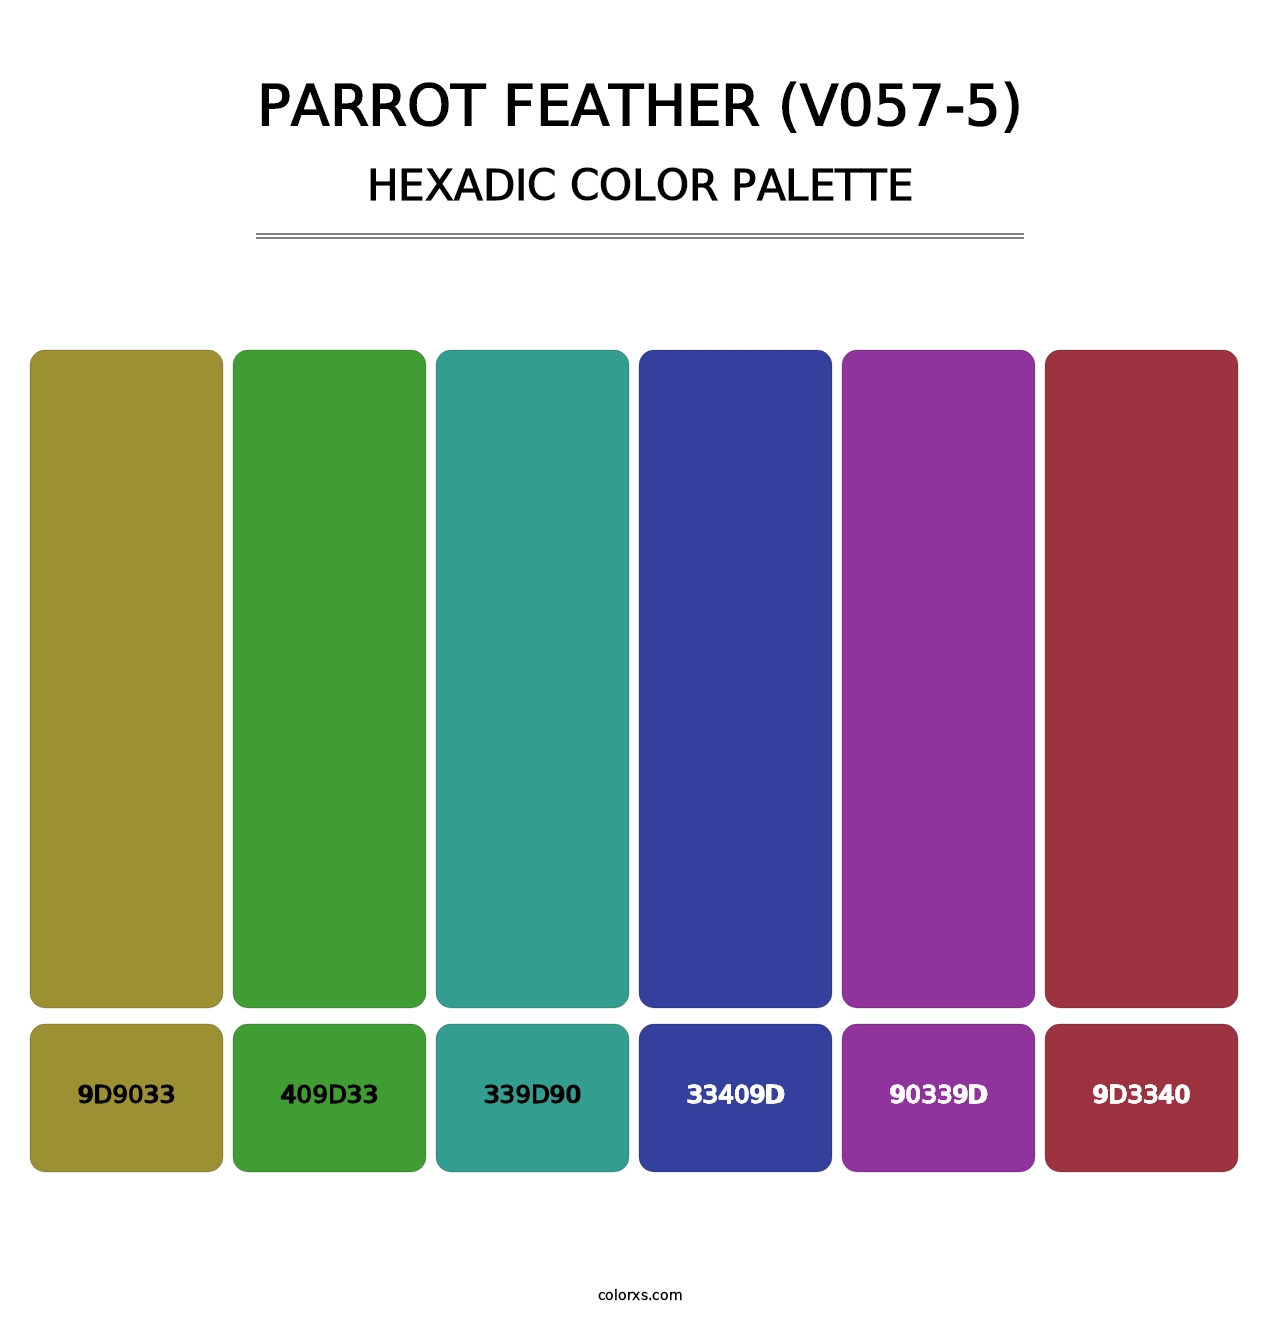 Parrot Feather (V057-5) - Hexadic Color Palette